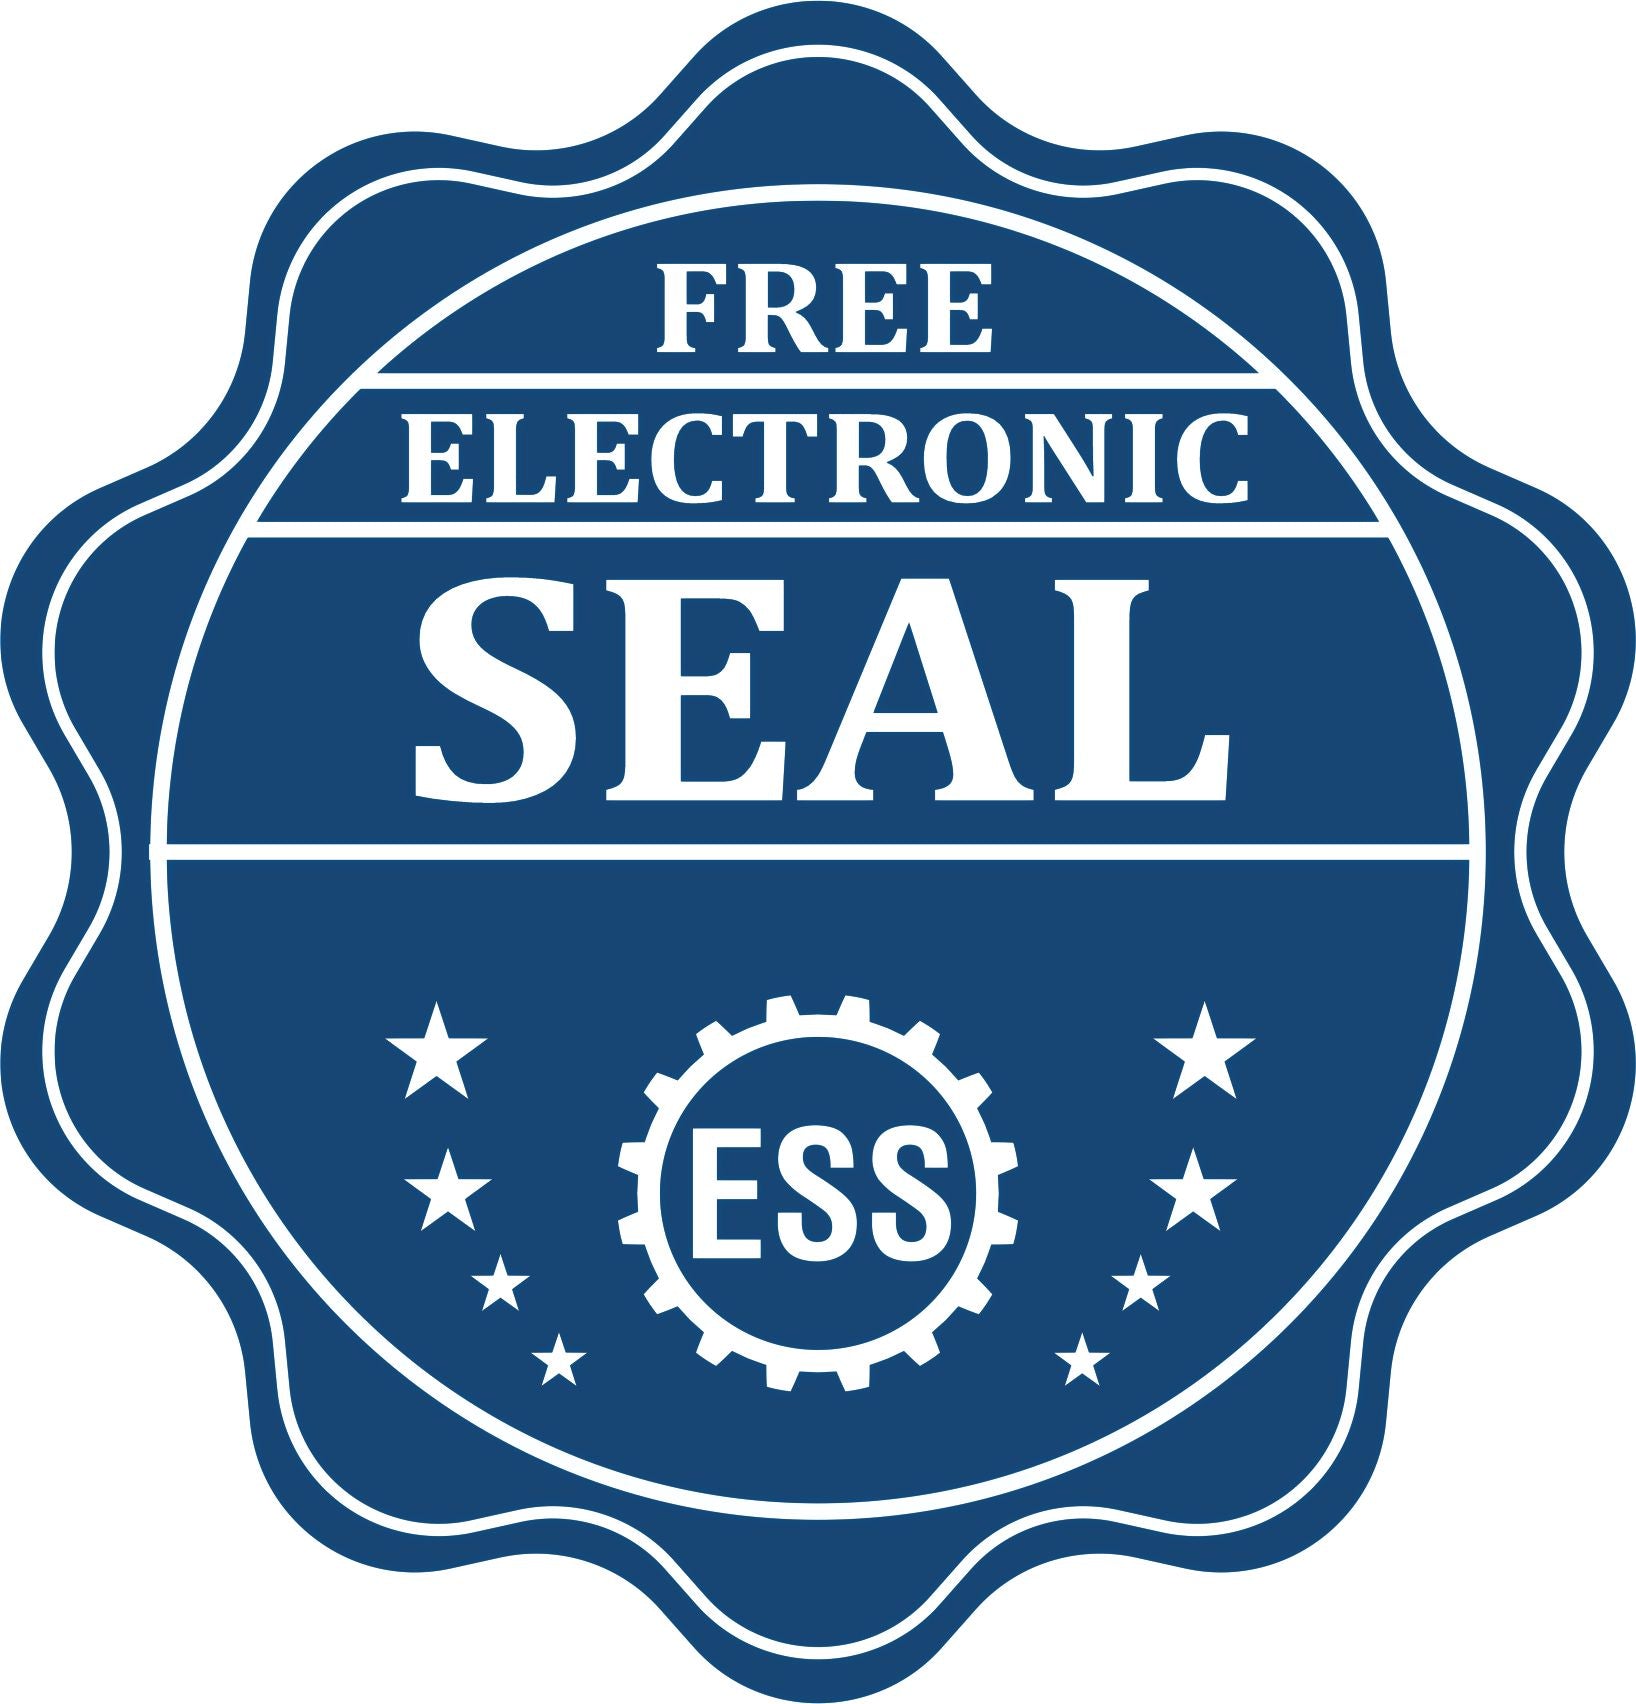 A badge showing a free electronic seal for the Premium MaxLight Pre-Inked Michigan Landscape Architectural Stamp with stars and the ESS gear on the emblem.